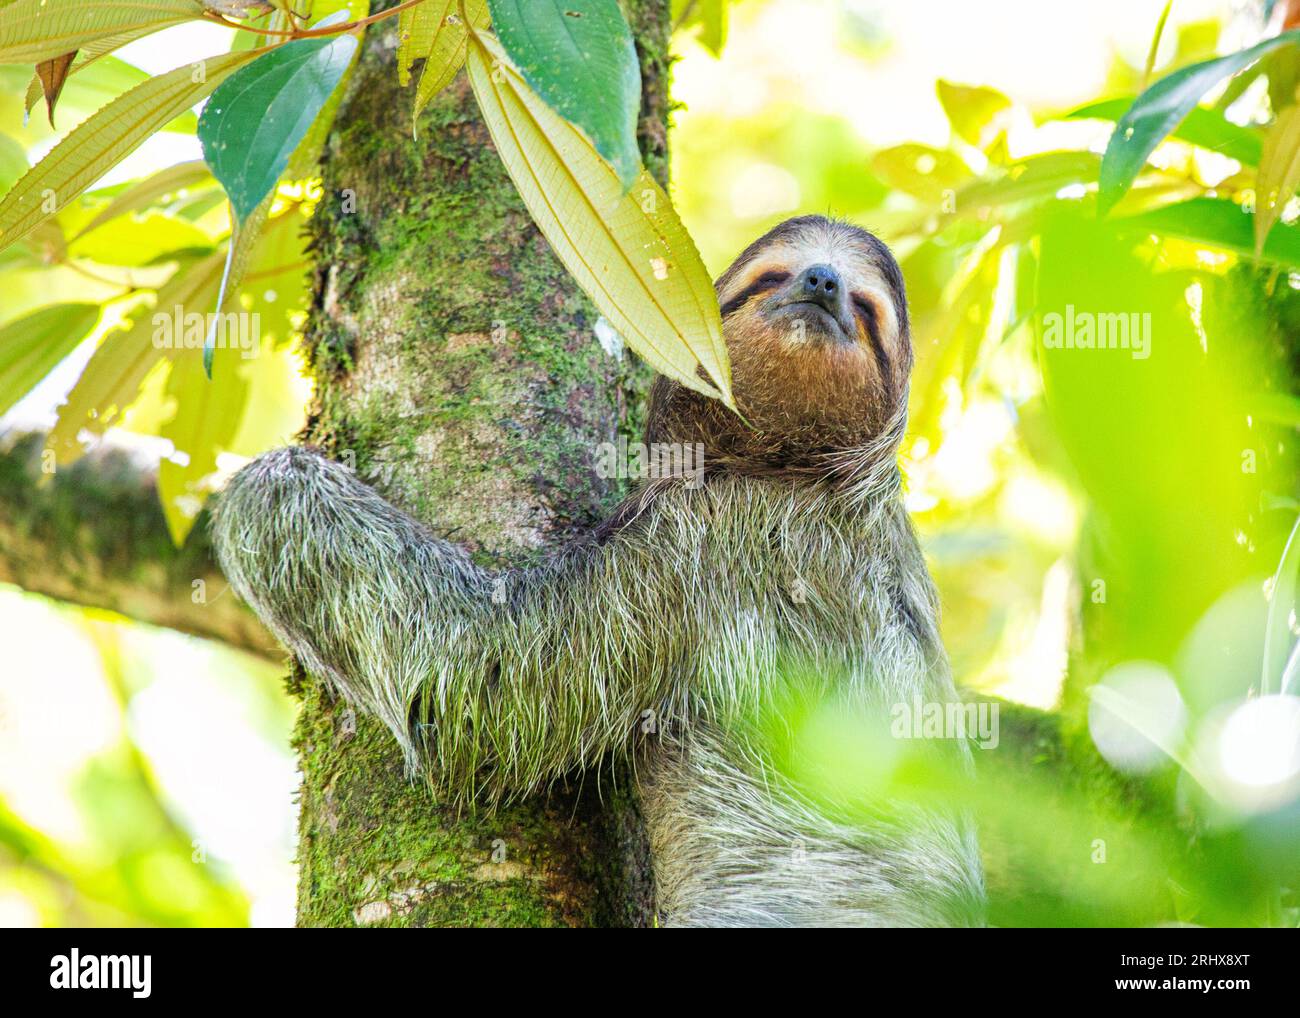 Discover the adorable brown-throated three-toed sloth from Costa Rica's lush rainforests. Its slow-paced charm captivates all. Stock Photo